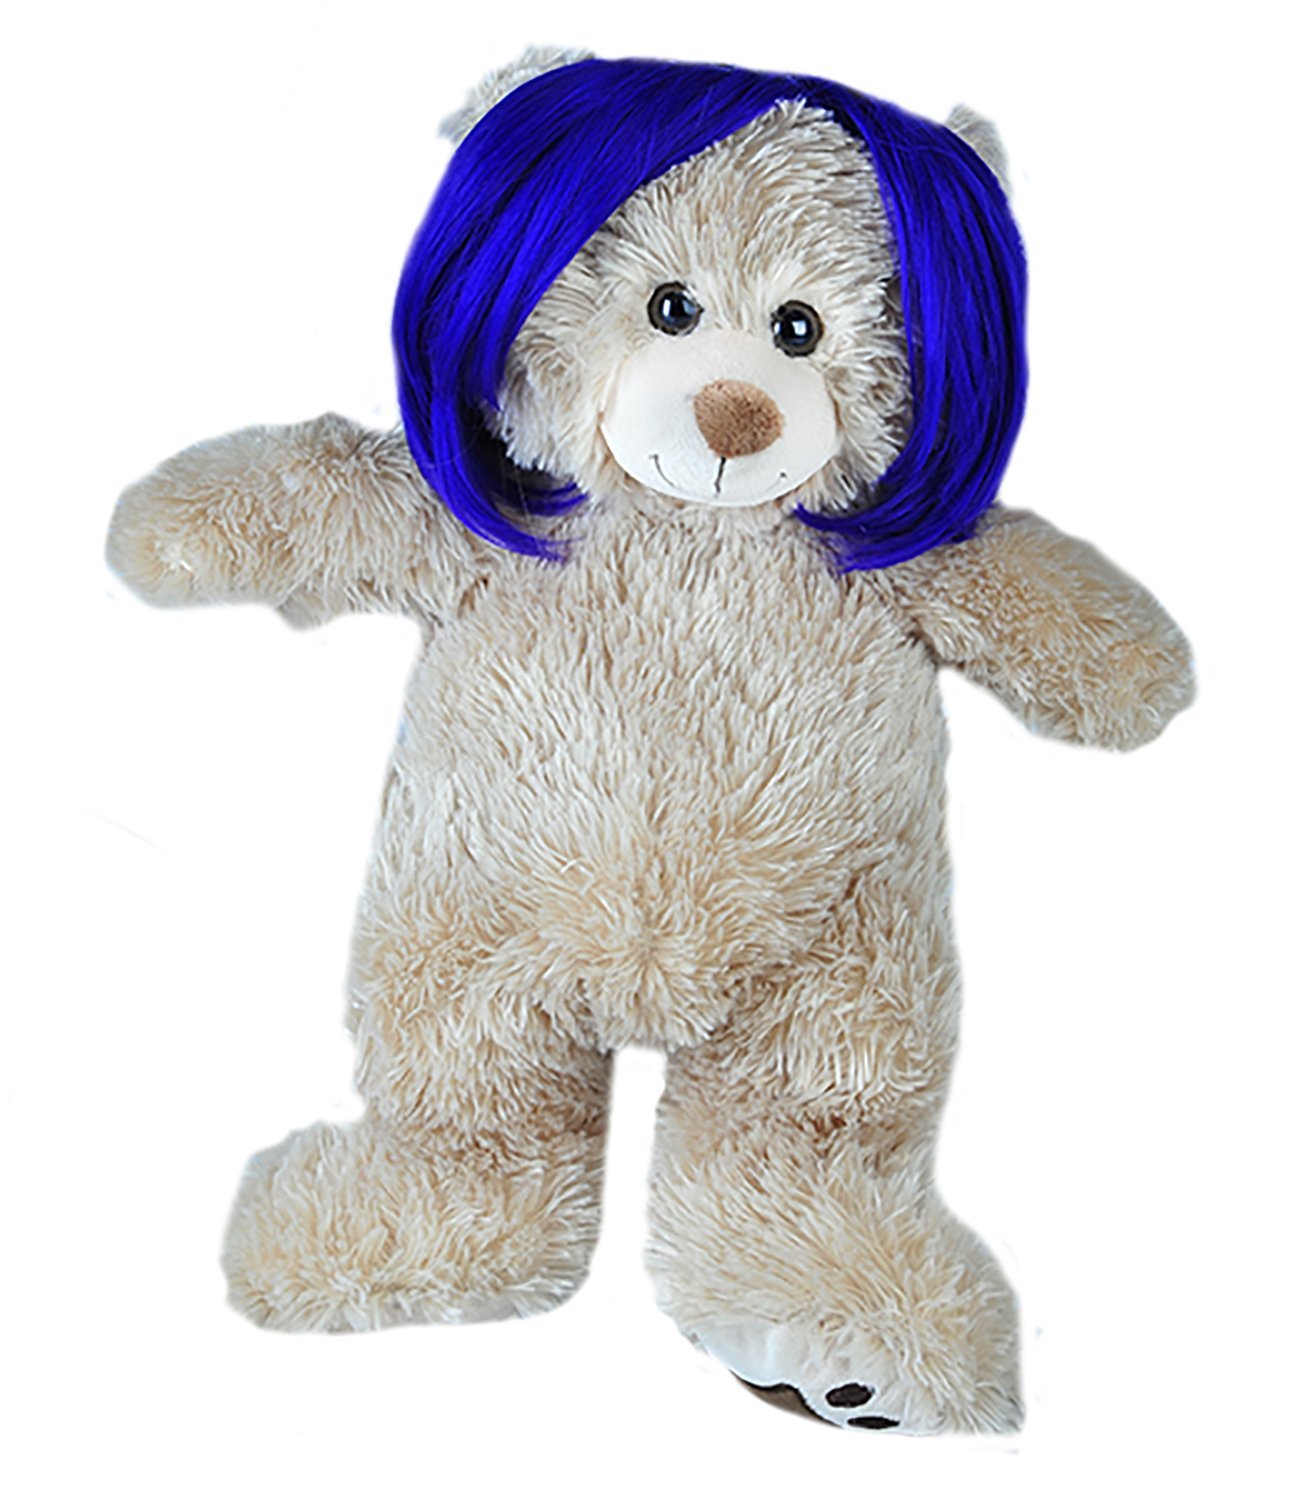 18/" Build-a-bear and Make Your Own Stuffed Short Bob Purple Wig Fits Most 14/"